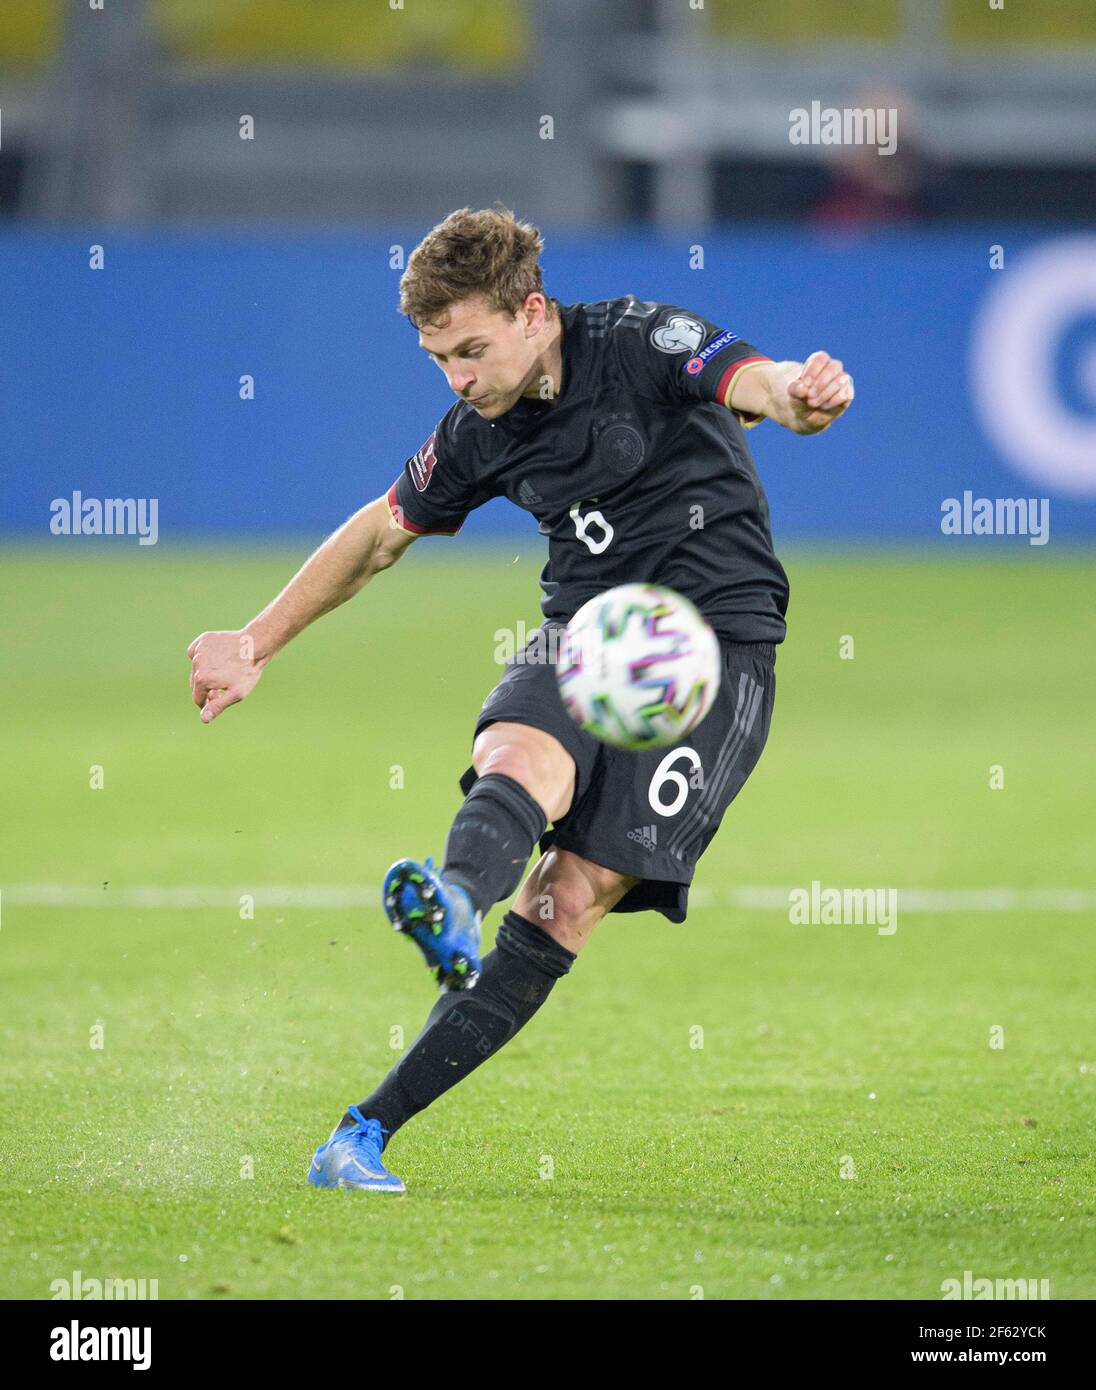 Joshua Kimmich Ger Action Soccer Laenderspiel World Cup Qualification Group J Matchday 1 Germany Ger Iceland Isl 3 0 On March 25th 21 In Duisburg Germany A Usage Worldwide Stock Photo Alamy